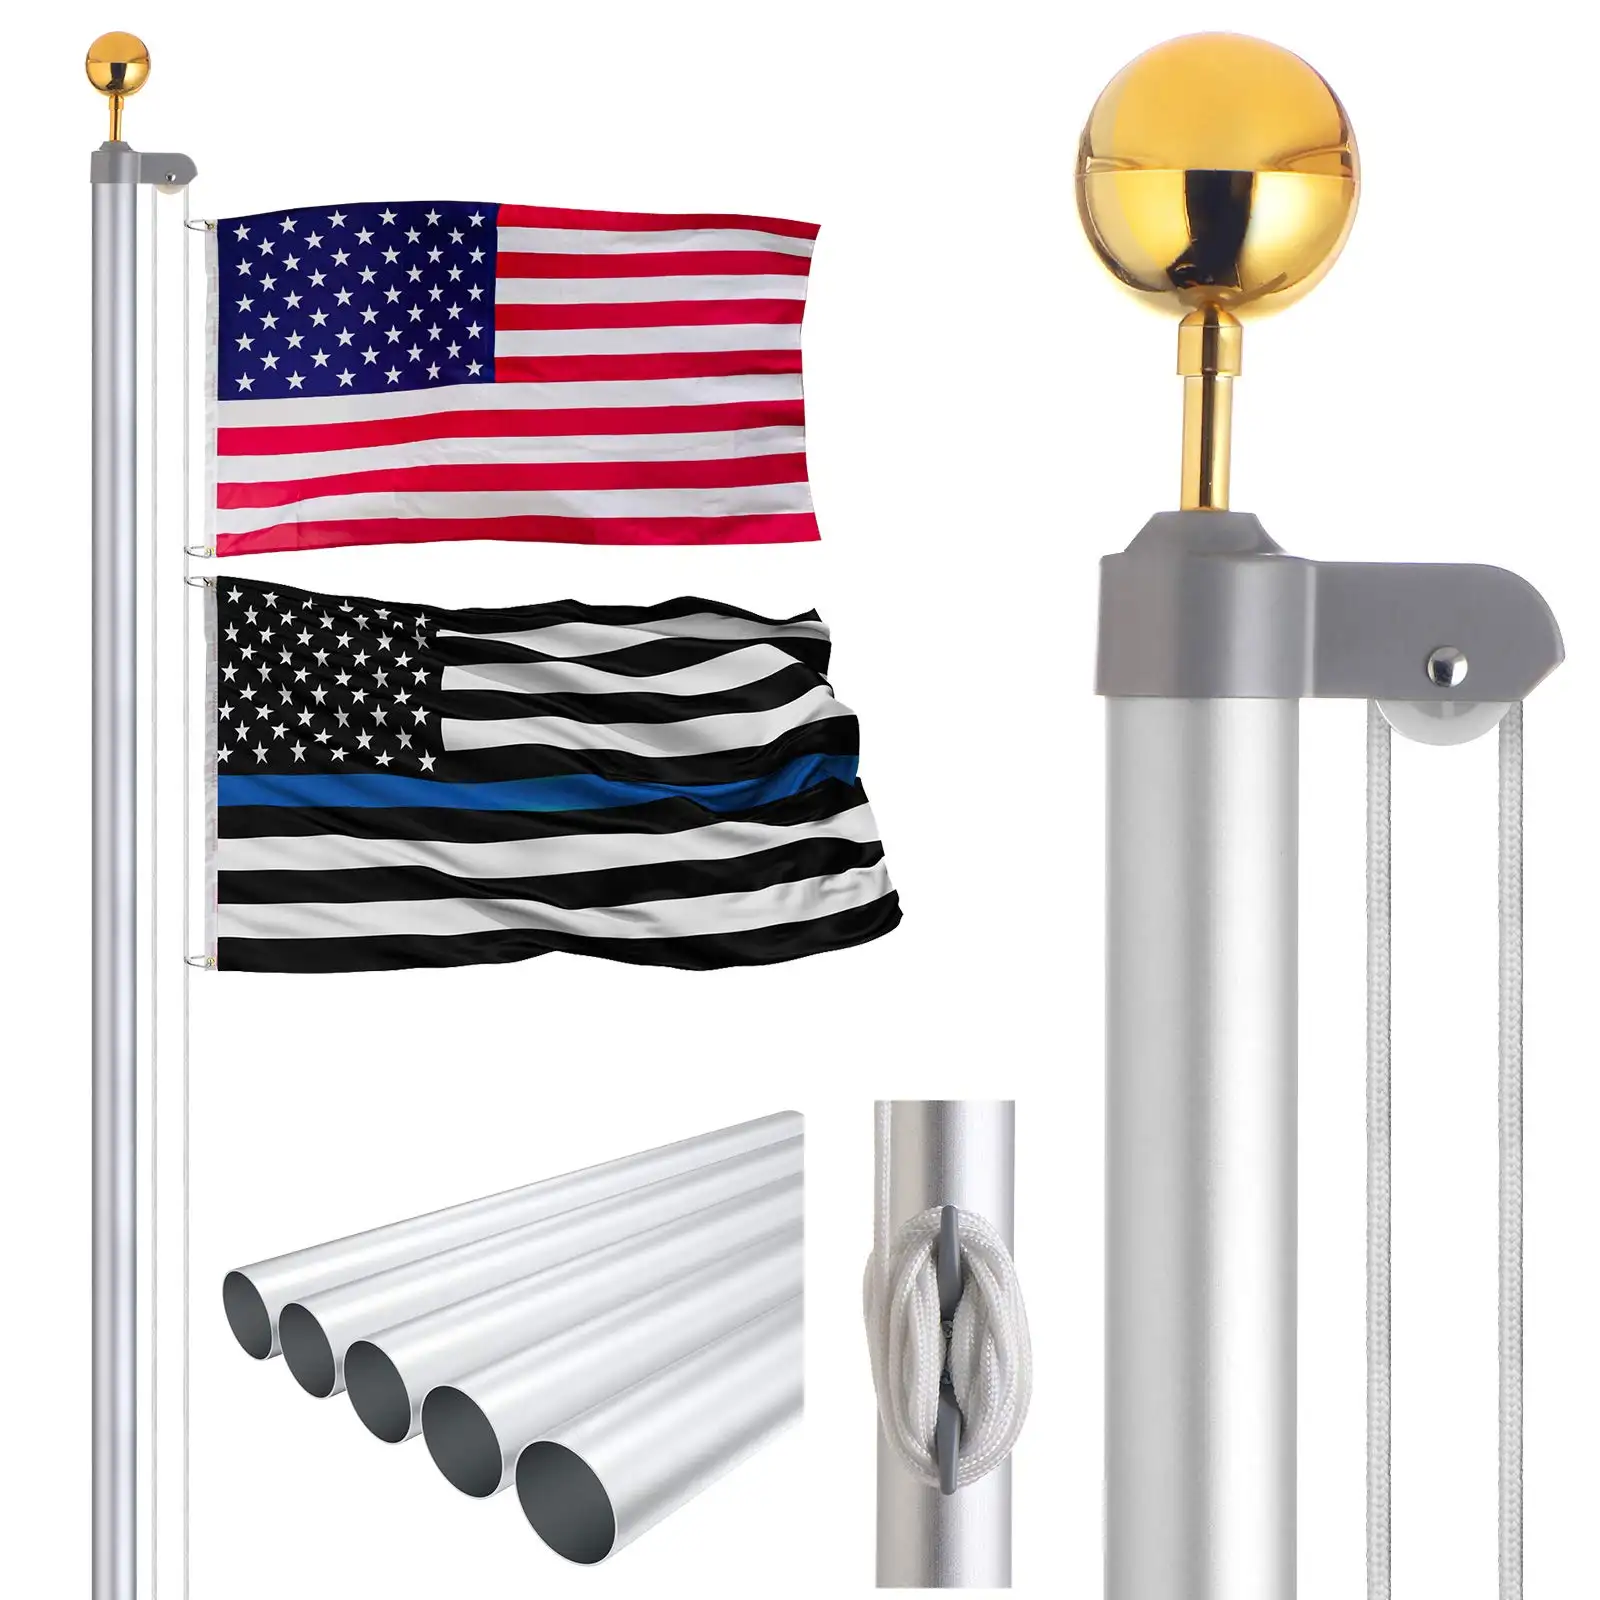 CYDISPLAY 6m Silver 20FT Flagpole 20 foot flagpole ceremonial Heavy Duty Aluminum Adjustable Collapsible Sectional Flag Pole